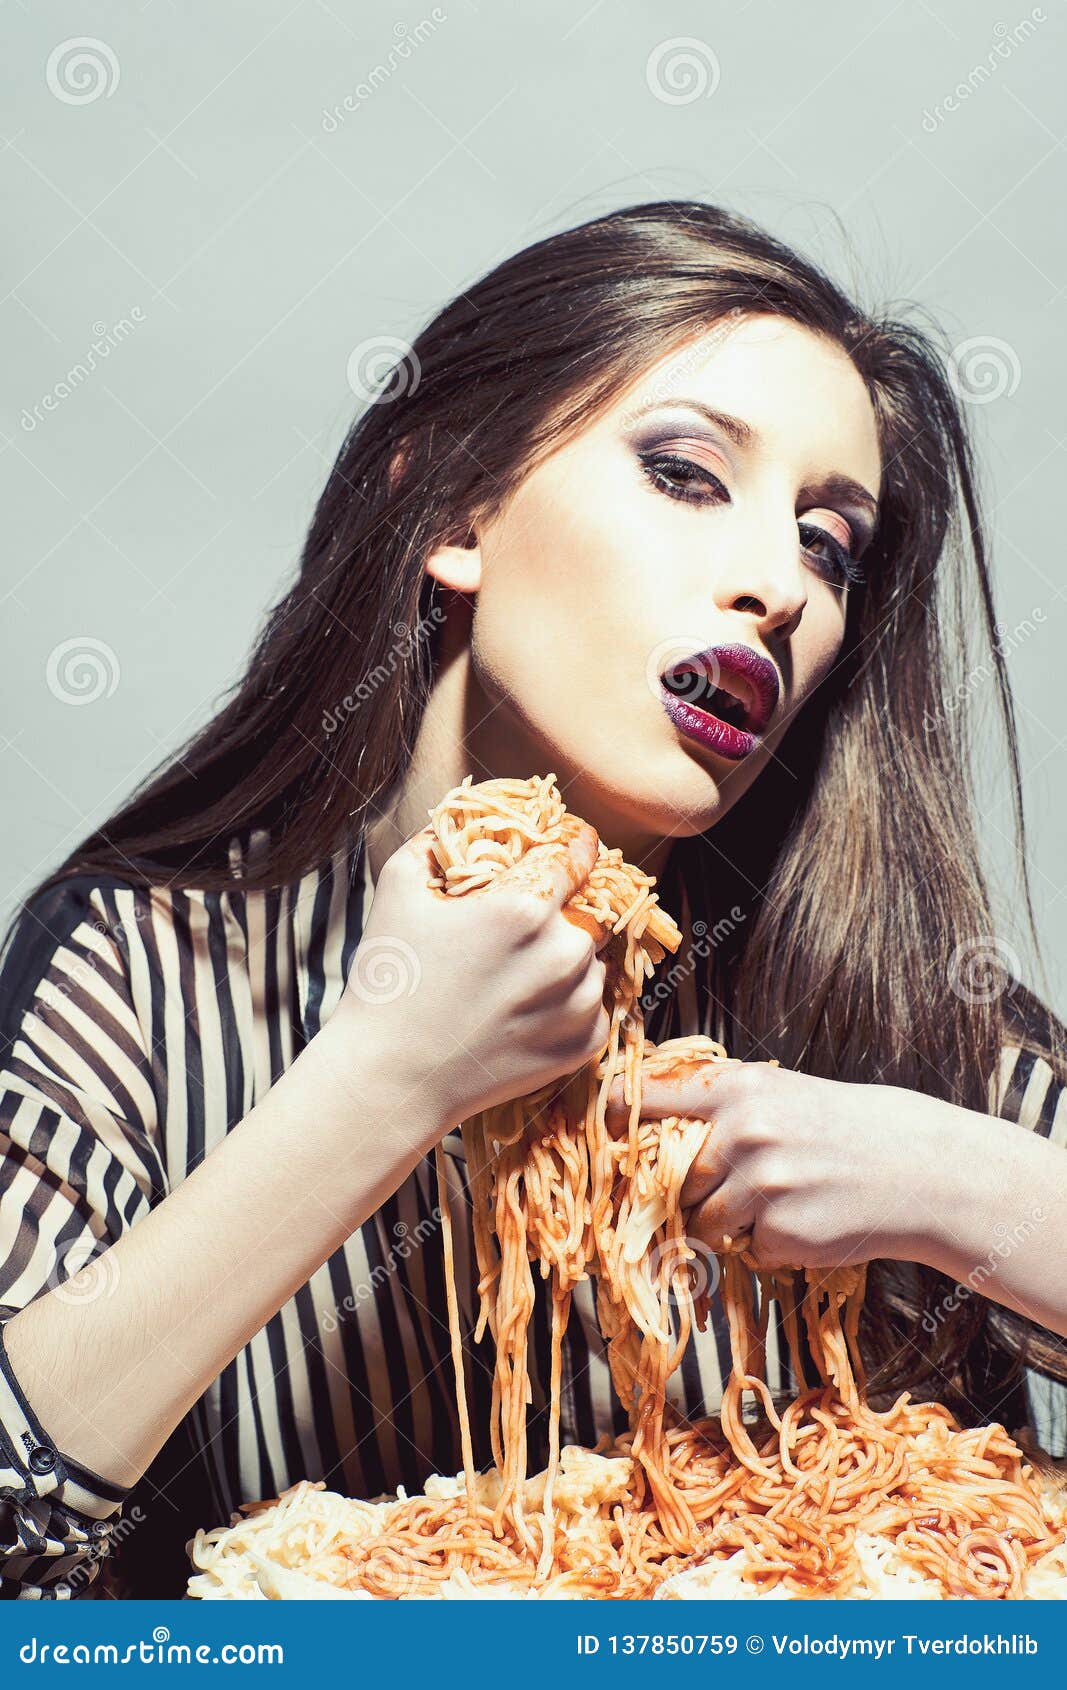 Glamour Model And Food